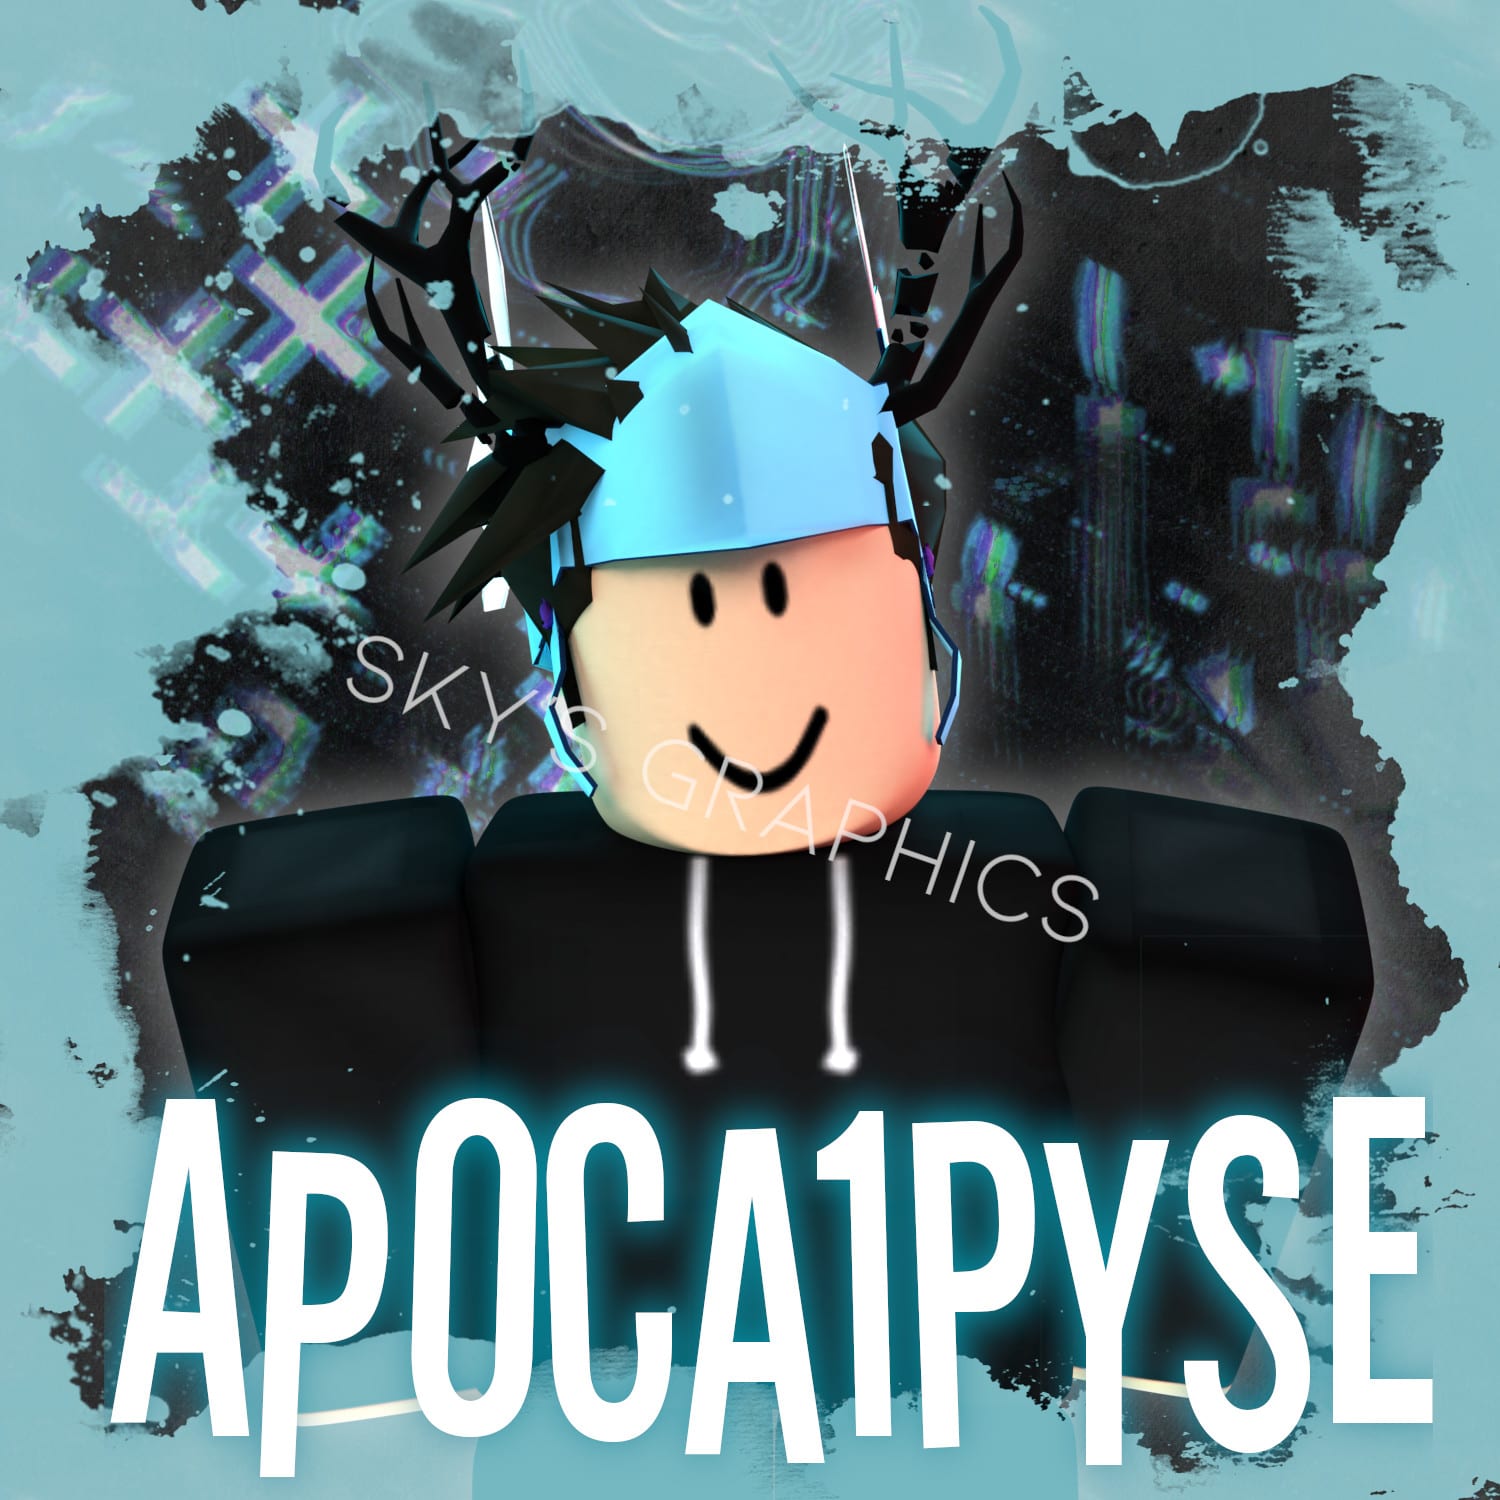 Make A Professional Roblox Gfx Of Your Character By Skiiess - roblox gfx maker for free